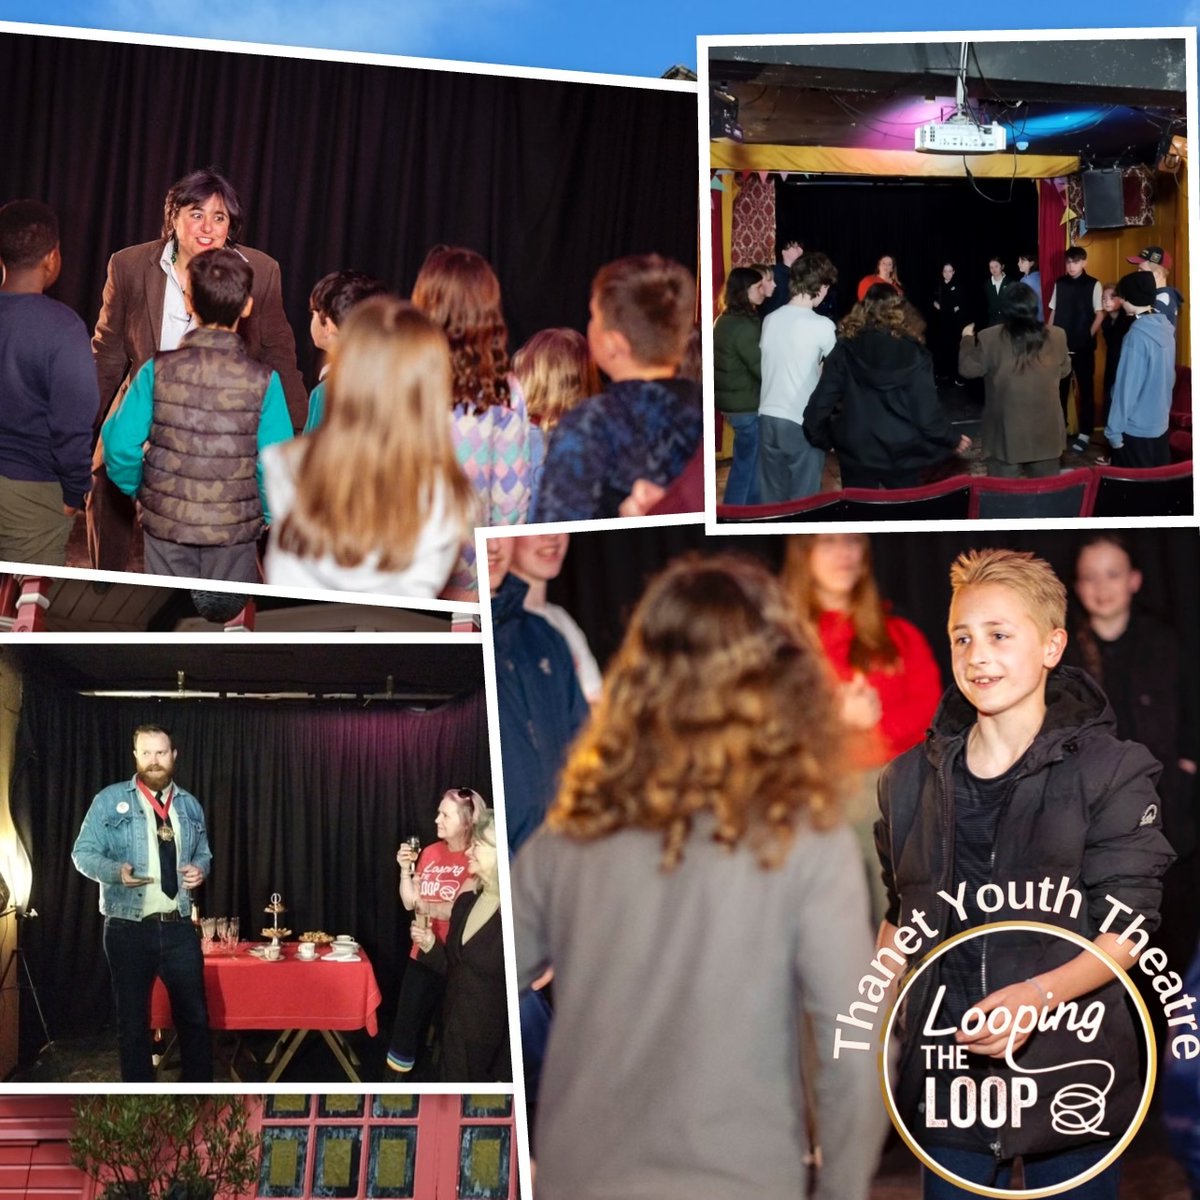 🎭 Read the inspiring journey of #Thanet Youth Theatre, a beacon of creativity in our community! Discover how @loopingthanet 's innovative approach, fuelled by the spirit of Thanet's iconic Loop bus, is shaping young minds through the power of theatre. communityad.co.uk/exclusives/a-b…